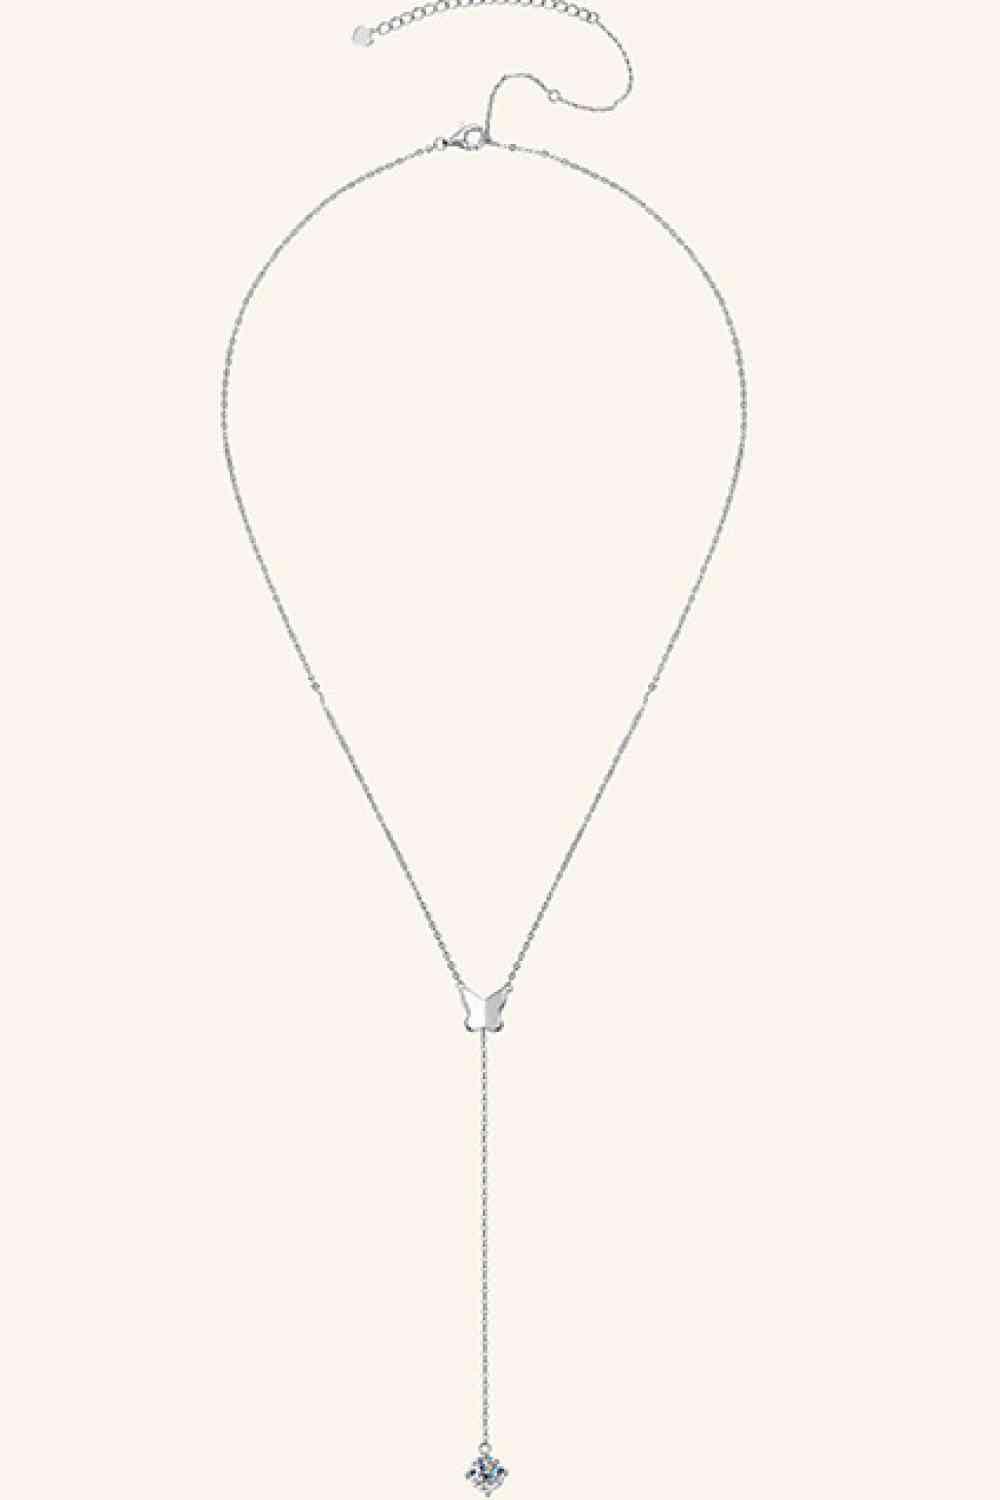 a white necklace with a cross on it